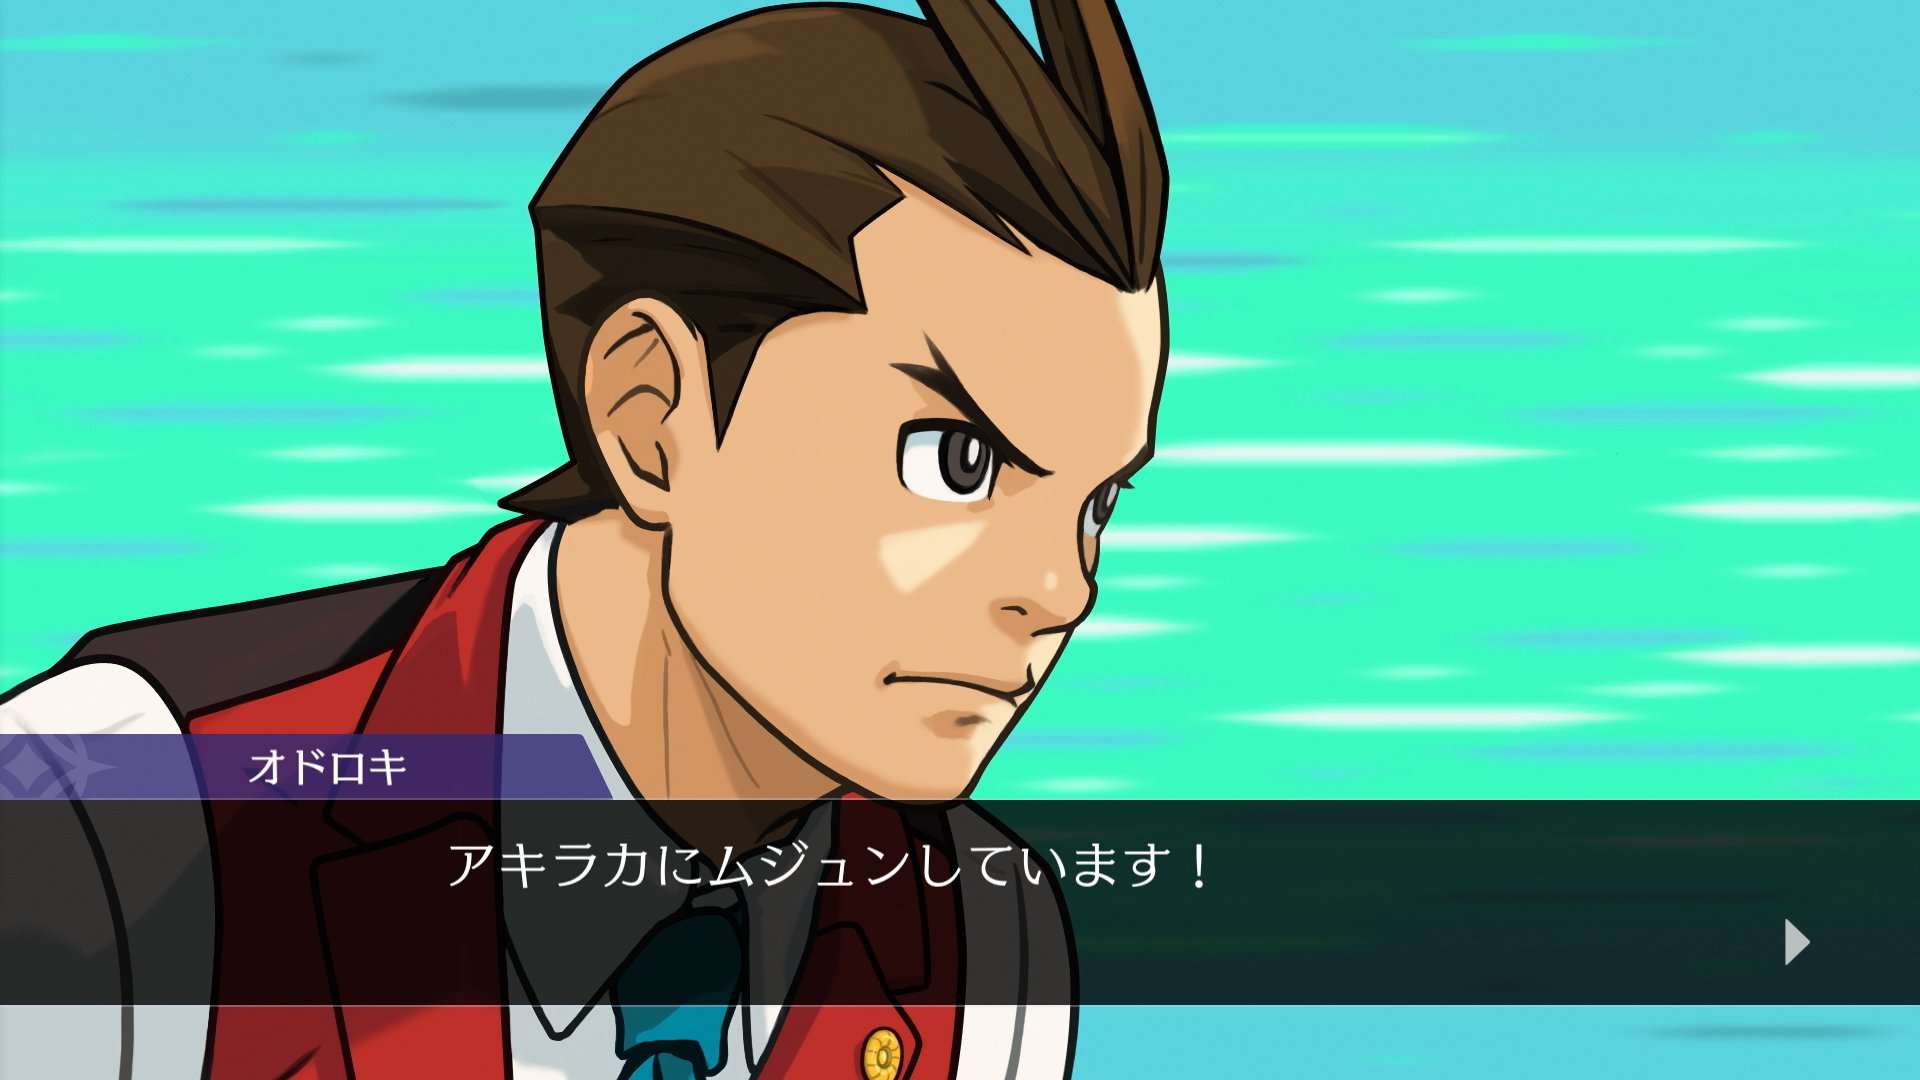 Ace Attorney Investigations: Miles Edgeworth now available for smartphones  in Japan - Gematsu